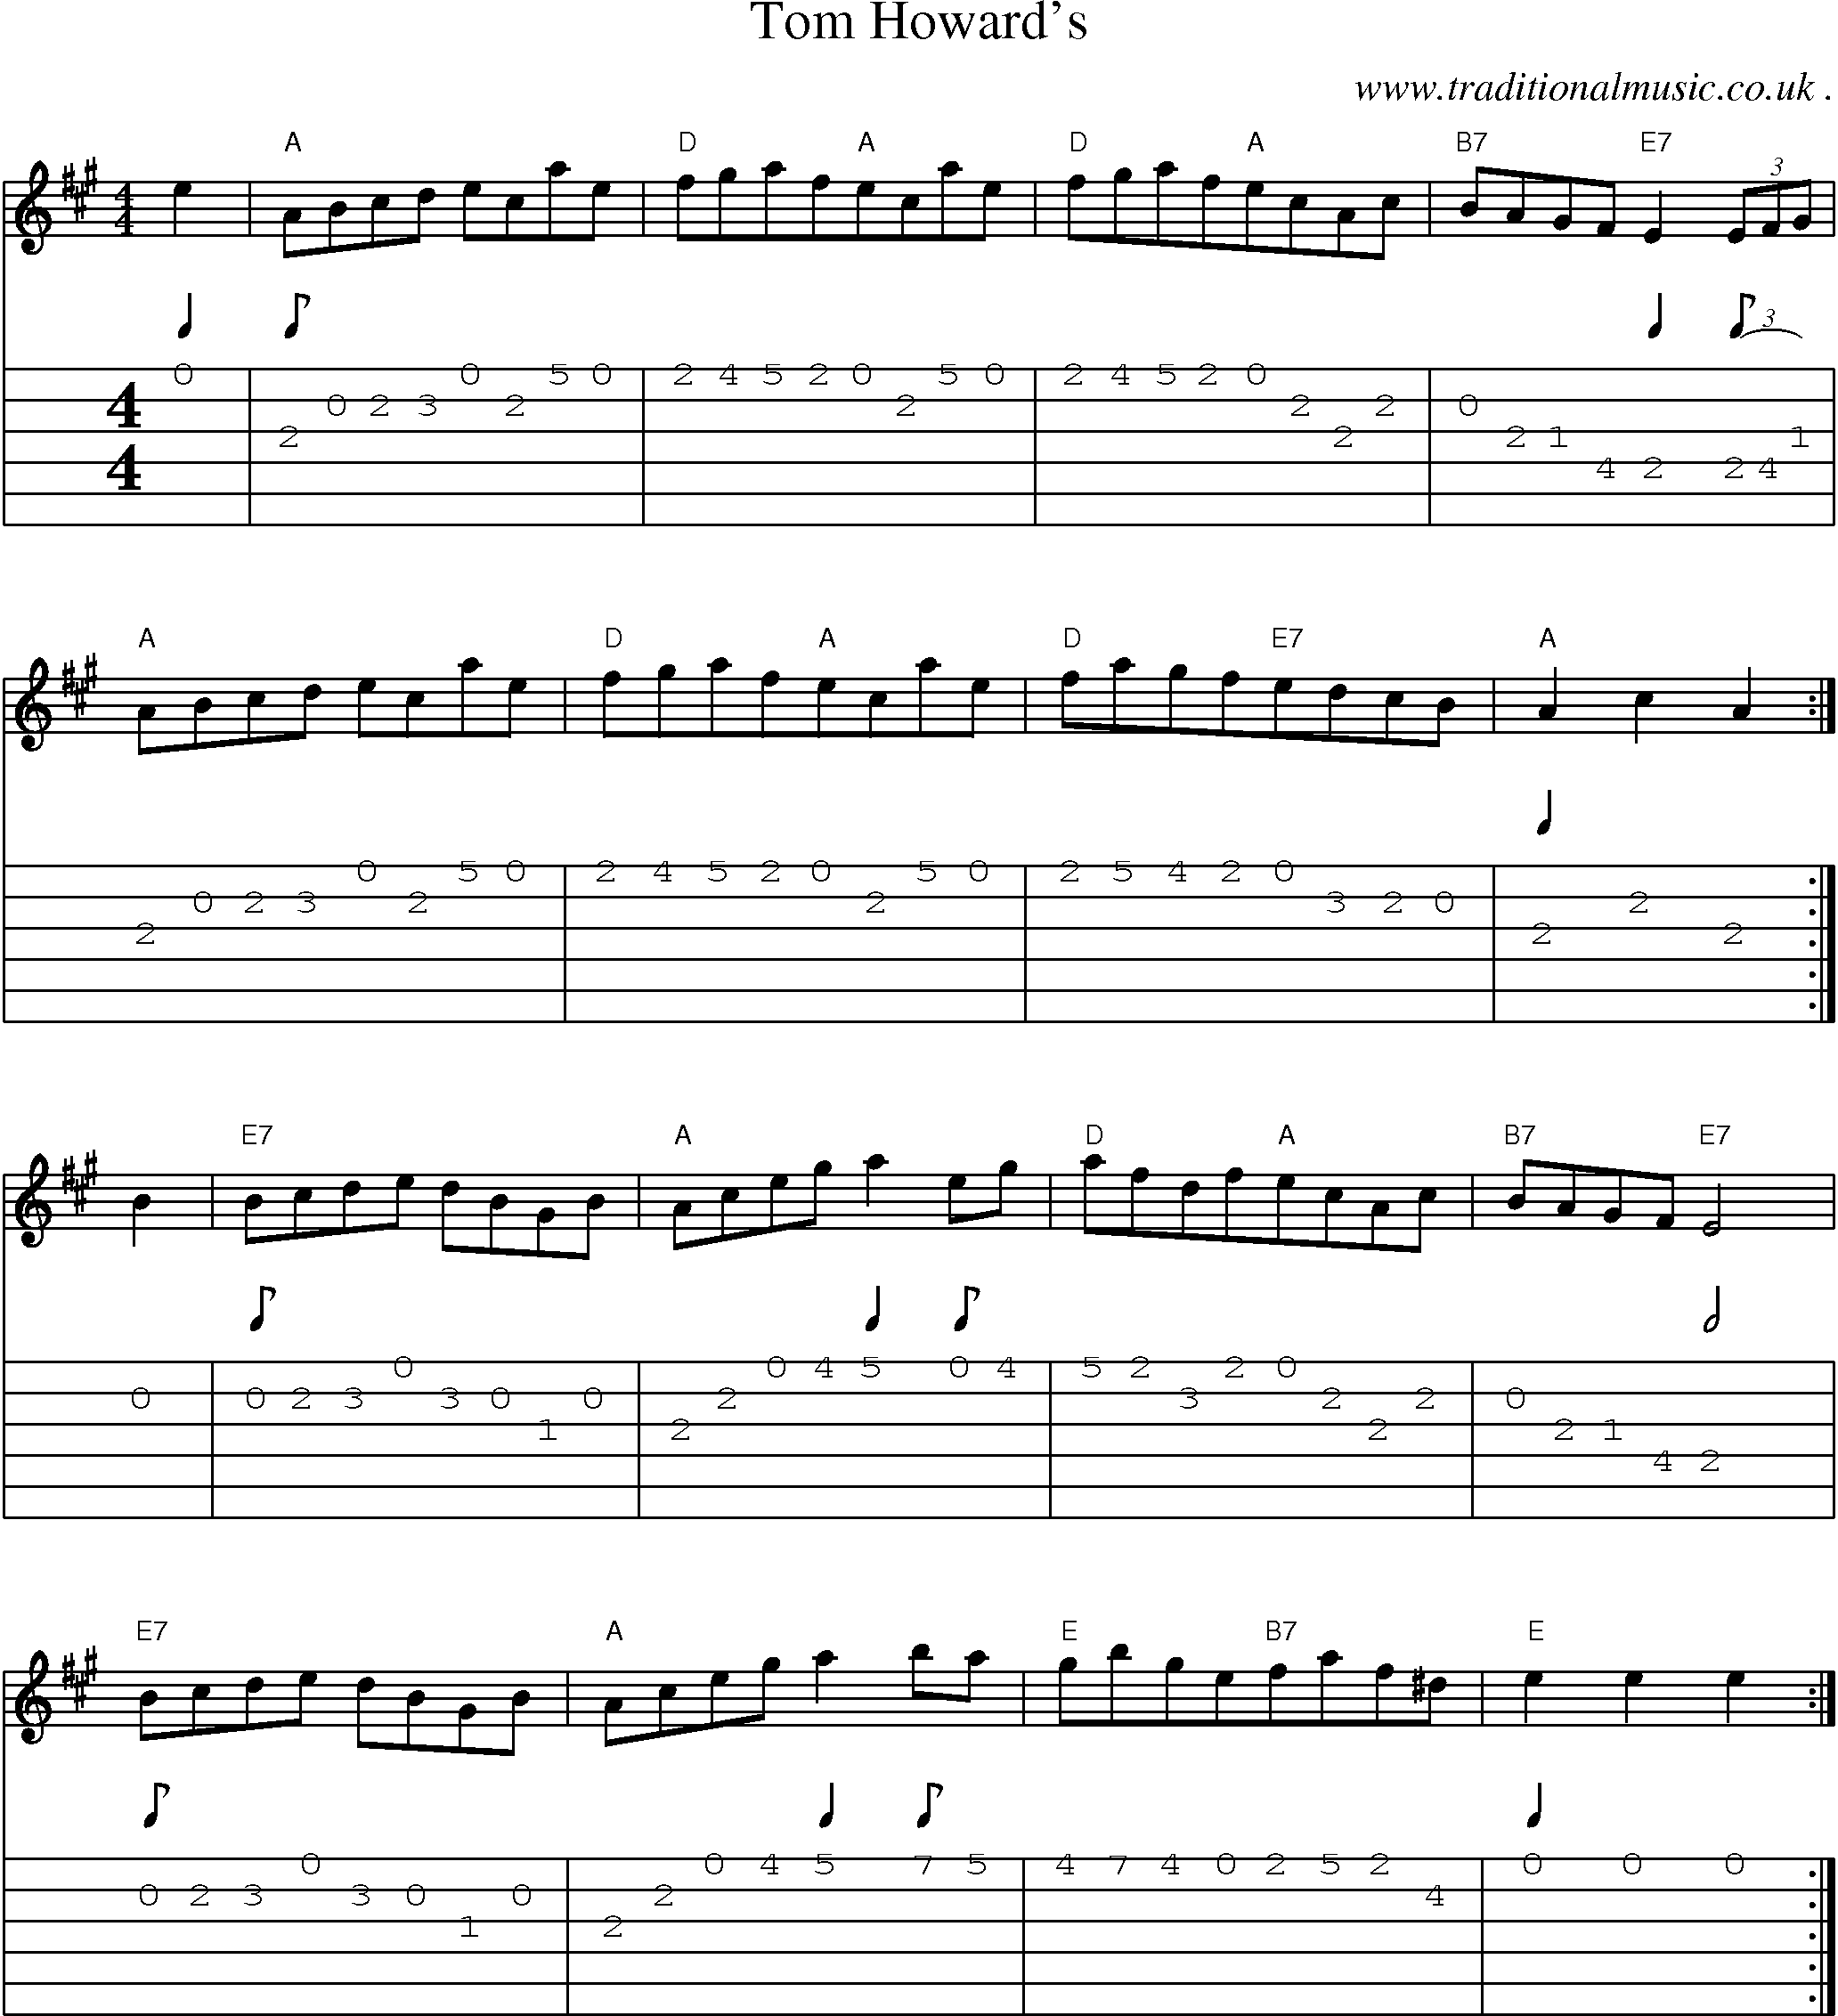 Sheet-Music and Guitar Tabs for Tom Howards